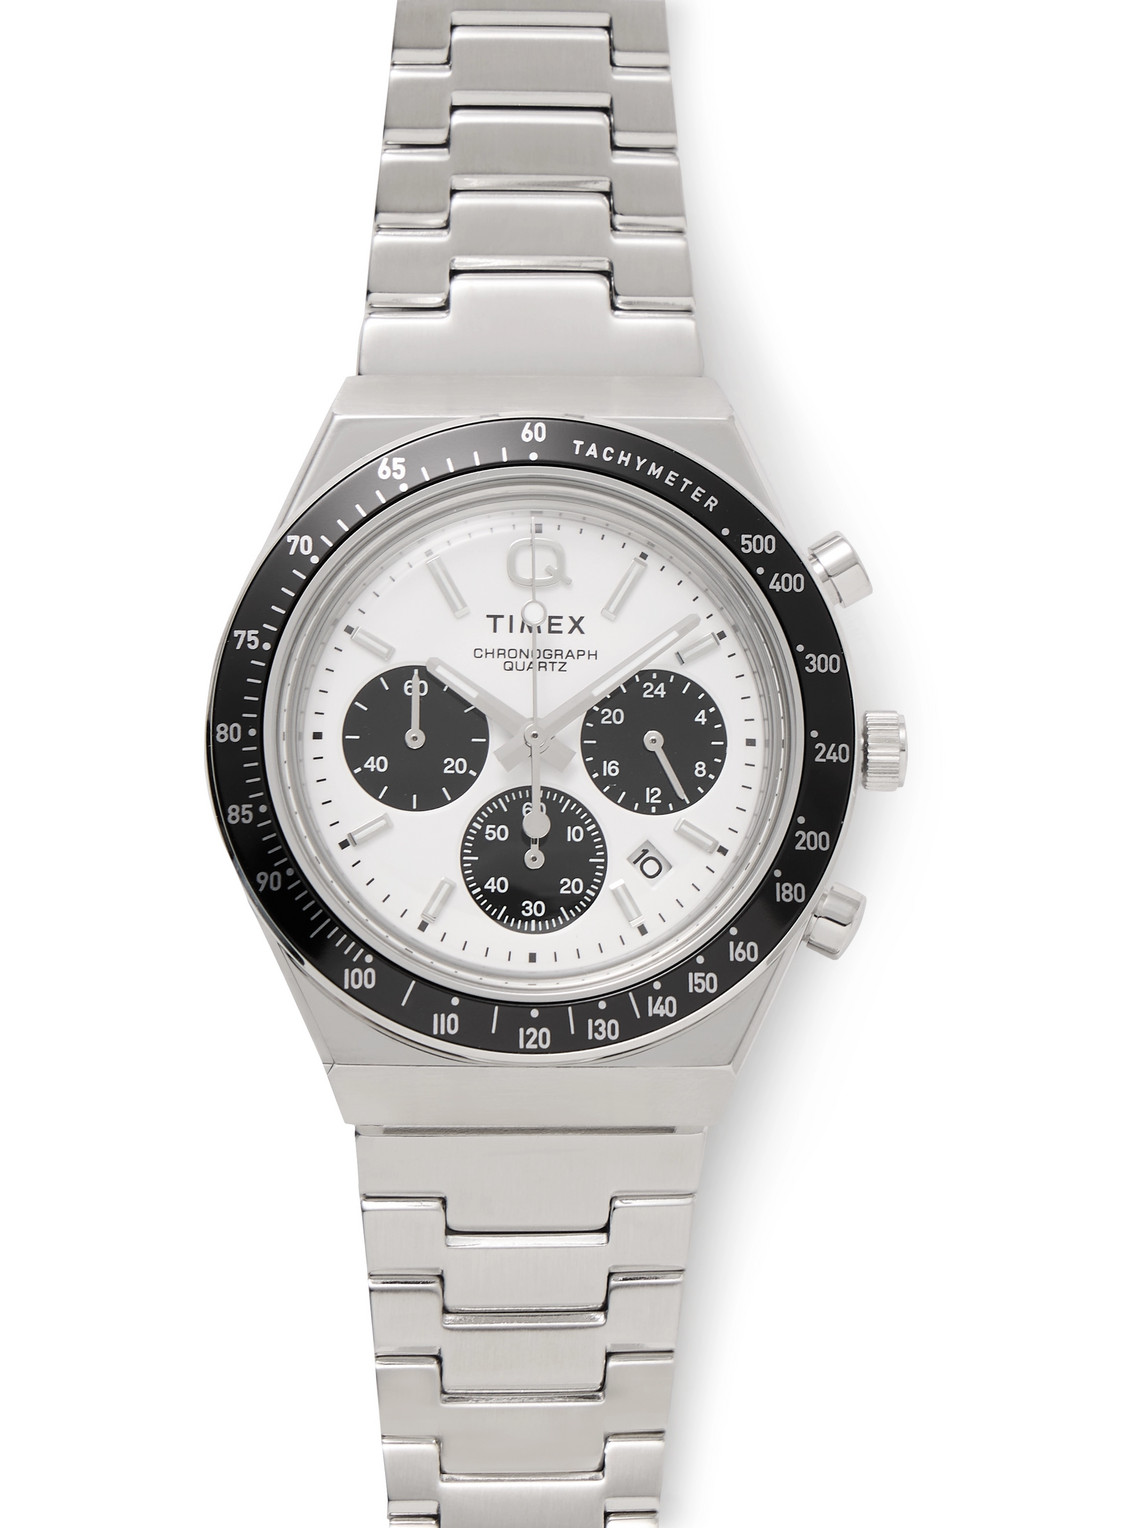 Q Chronograph 40mm Stainless Steel Watch